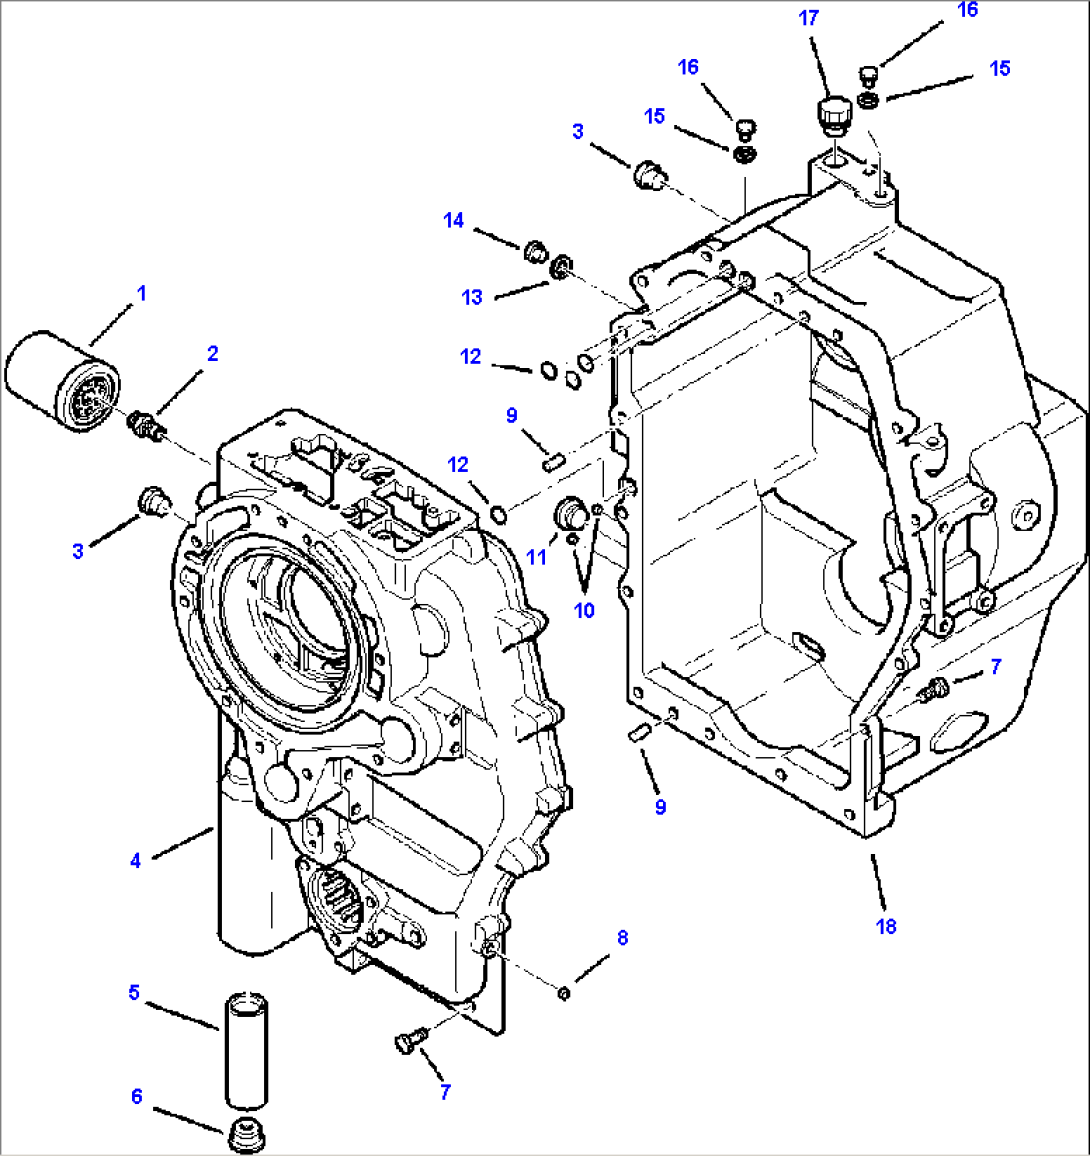 FIG. F3223-01A1 TRANSMISSION - HOUSINGS AND FILTERING